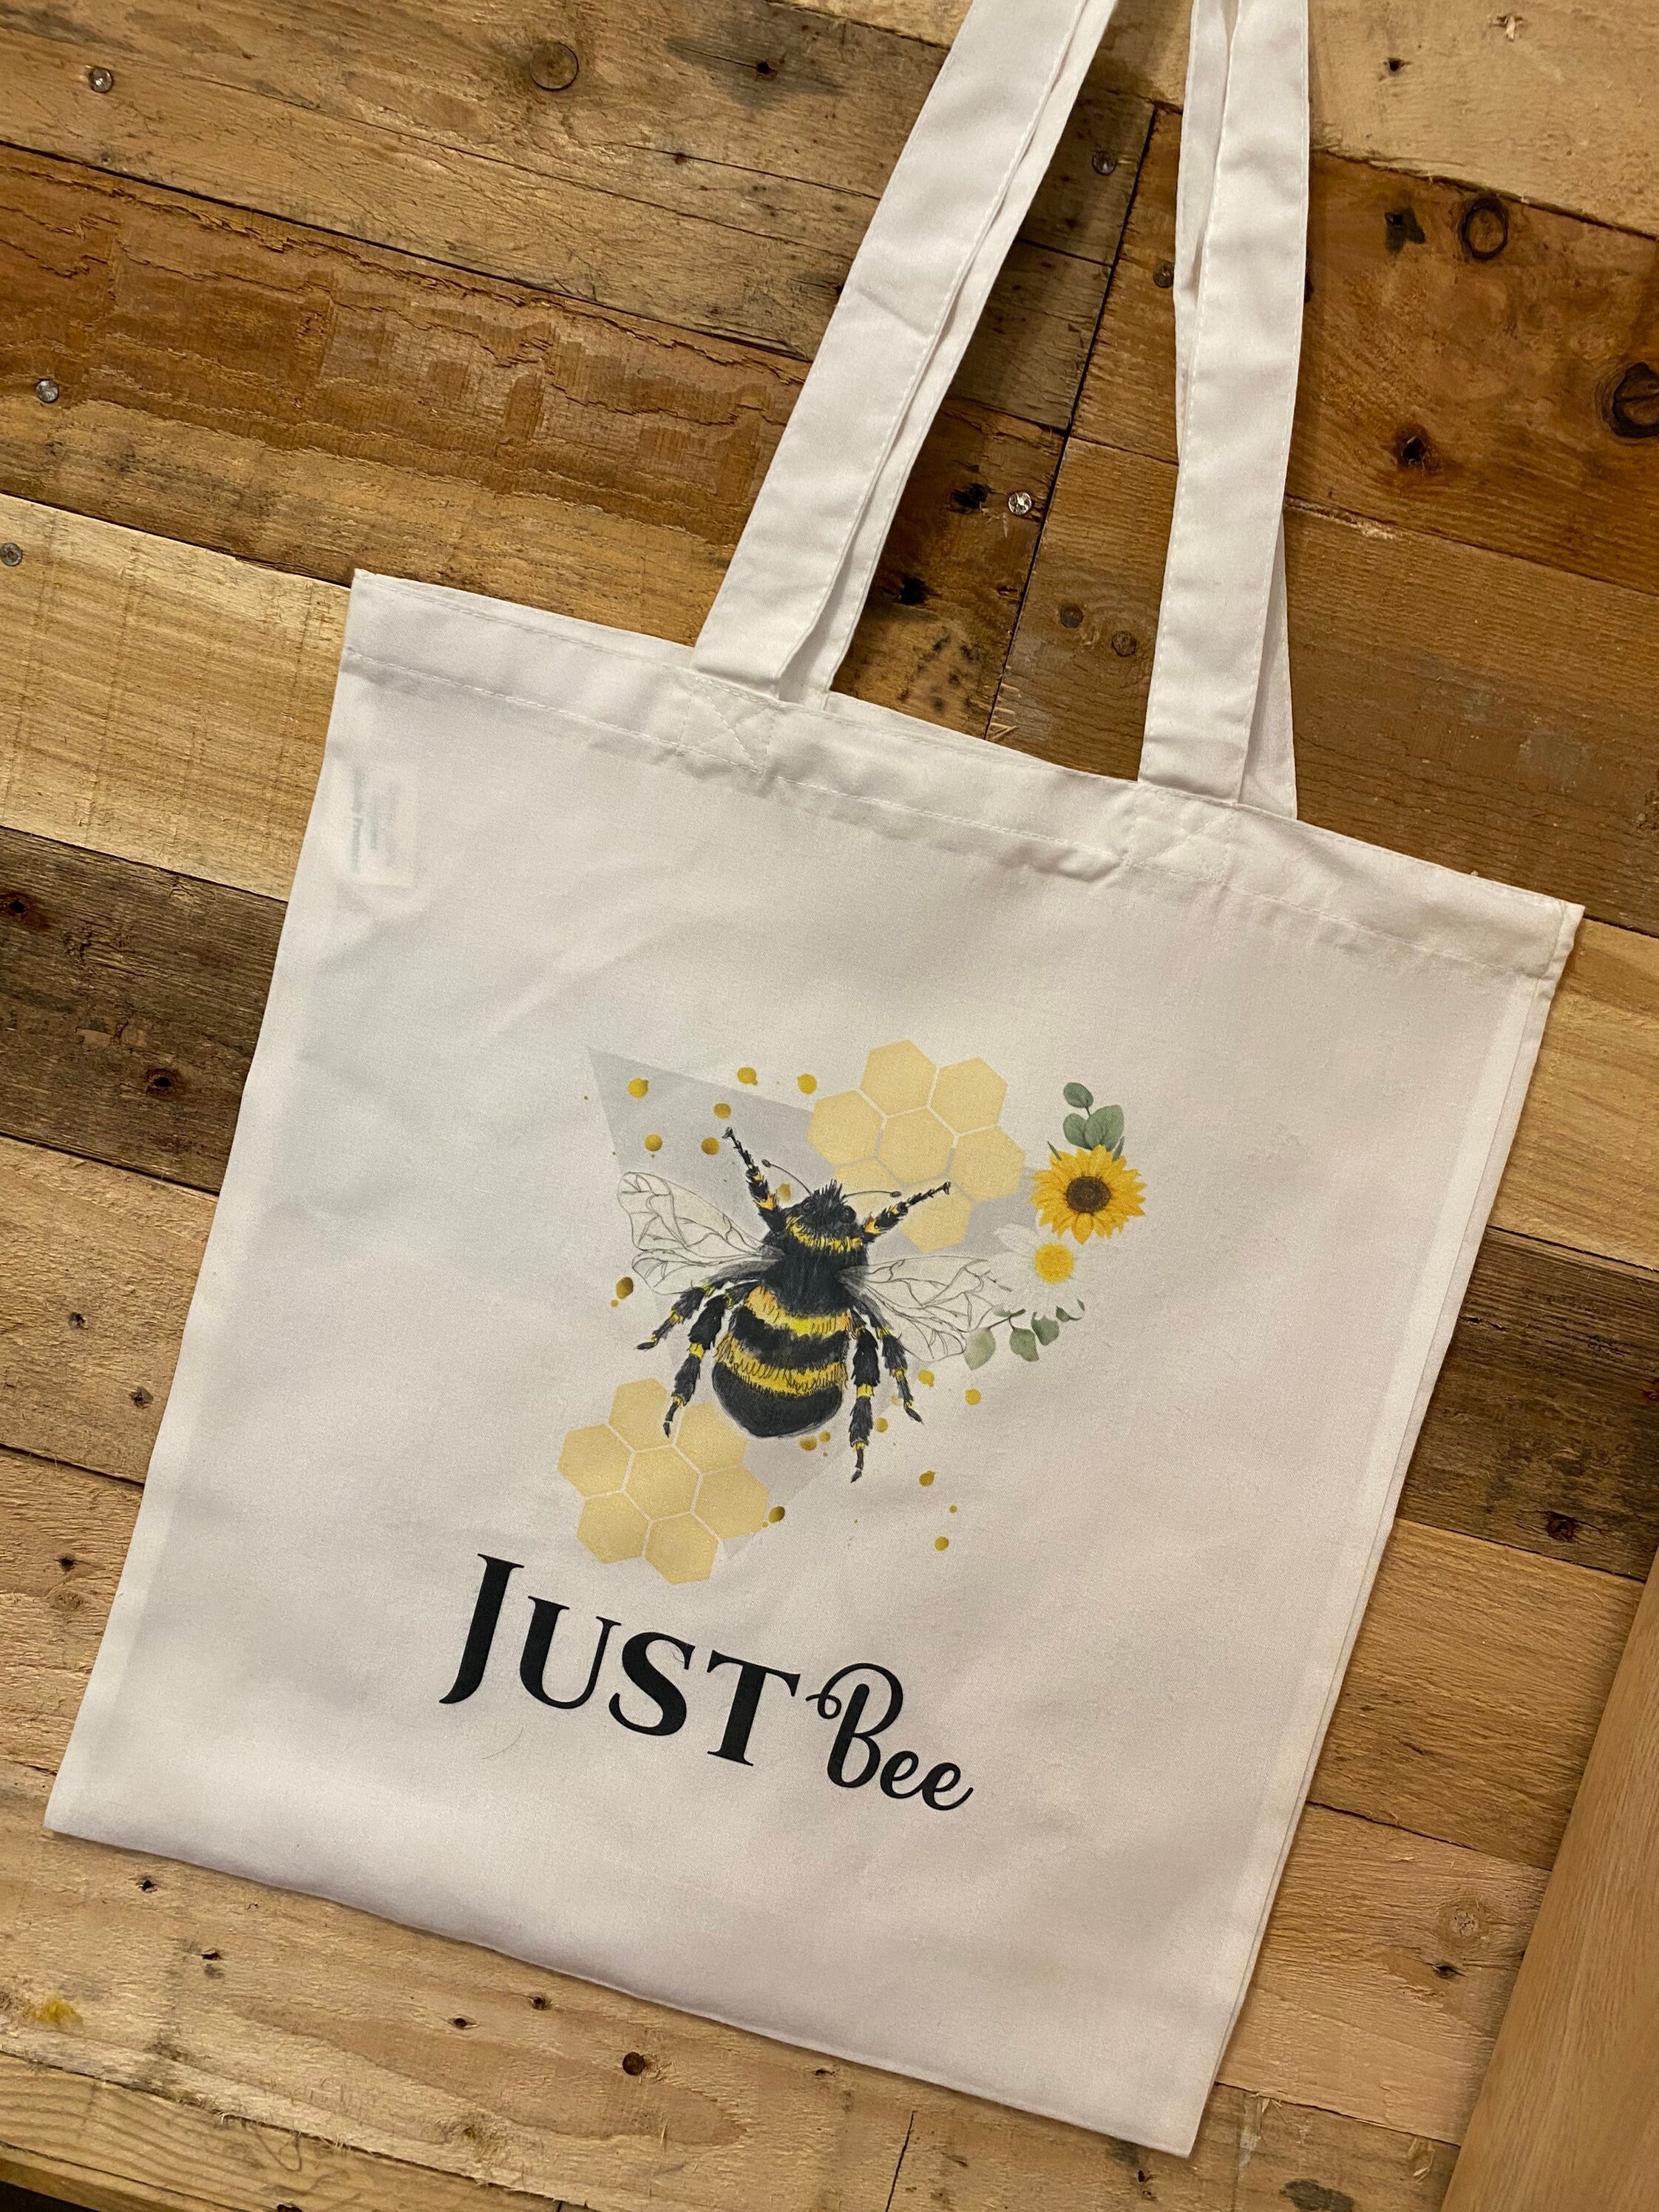 Bumble bee bag tote shopping bag lunch bag ladies gift | Etsy